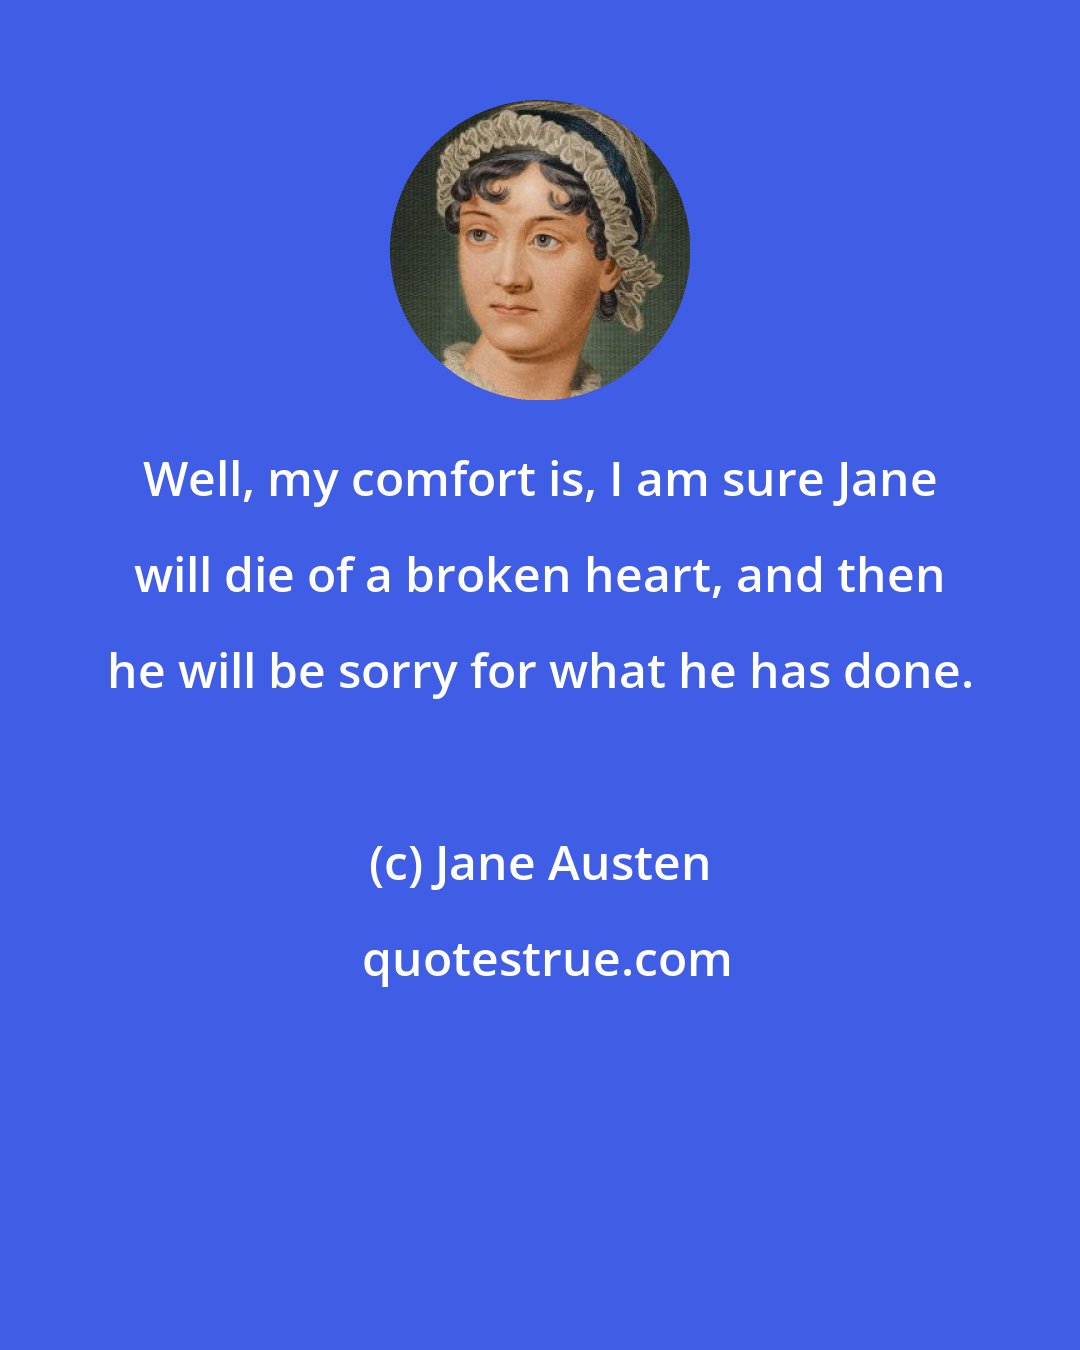 Jane Austen: Well, my comfort is, I am sure Jane will die of a broken heart, and then he will be sorry for what he has done.